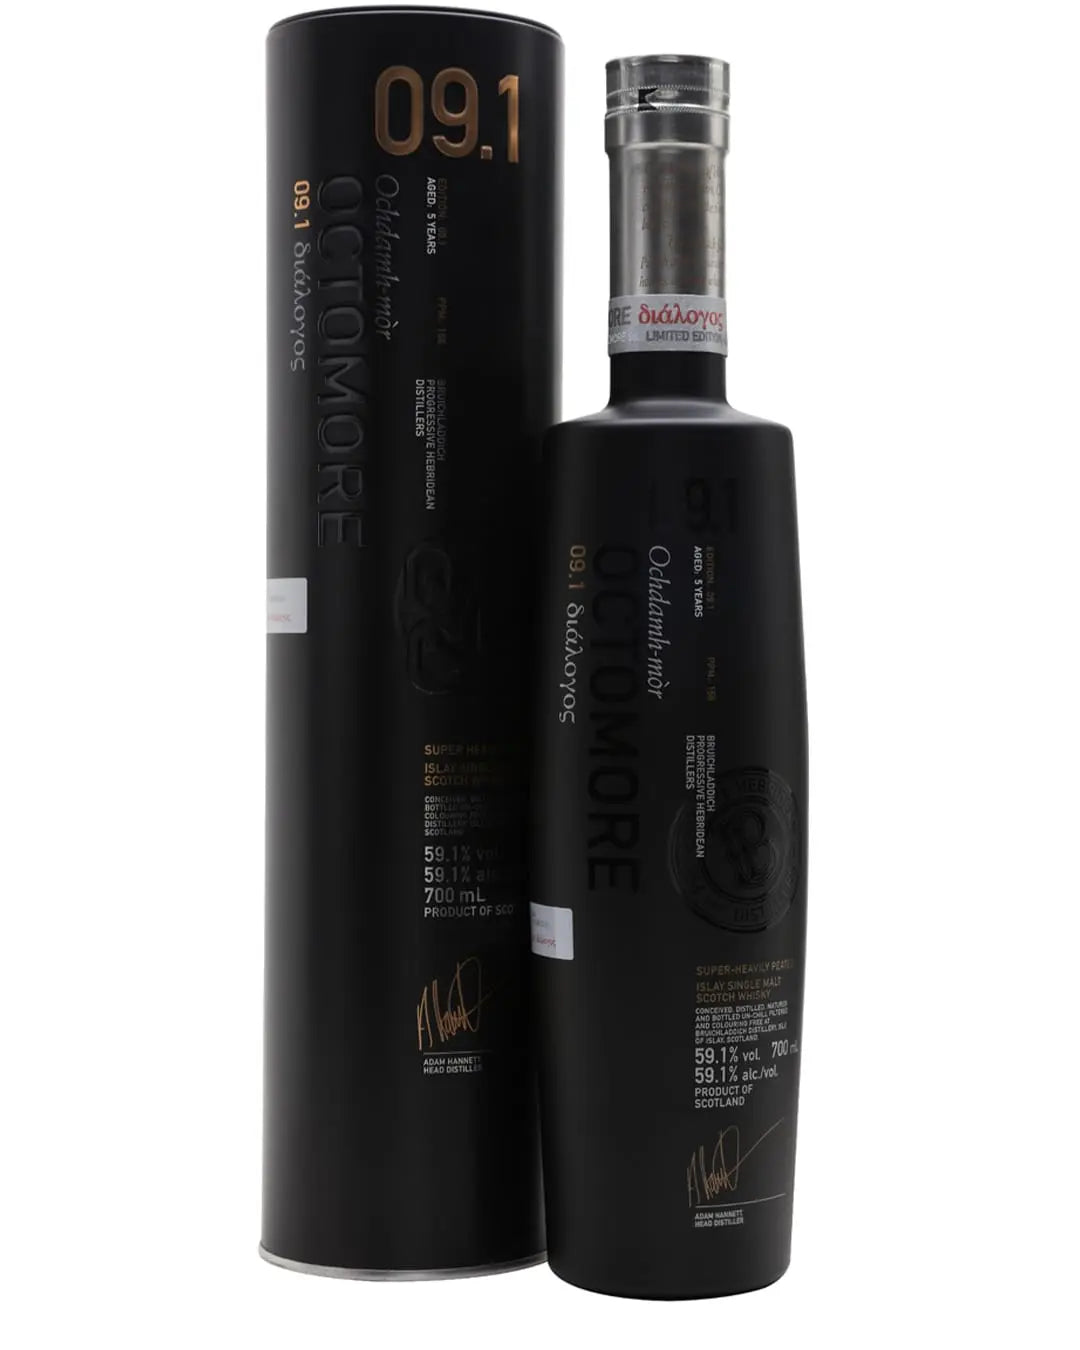 Bruichladdich Octomore 9.1 Whisky, 70 cl Whisky 5055807410816